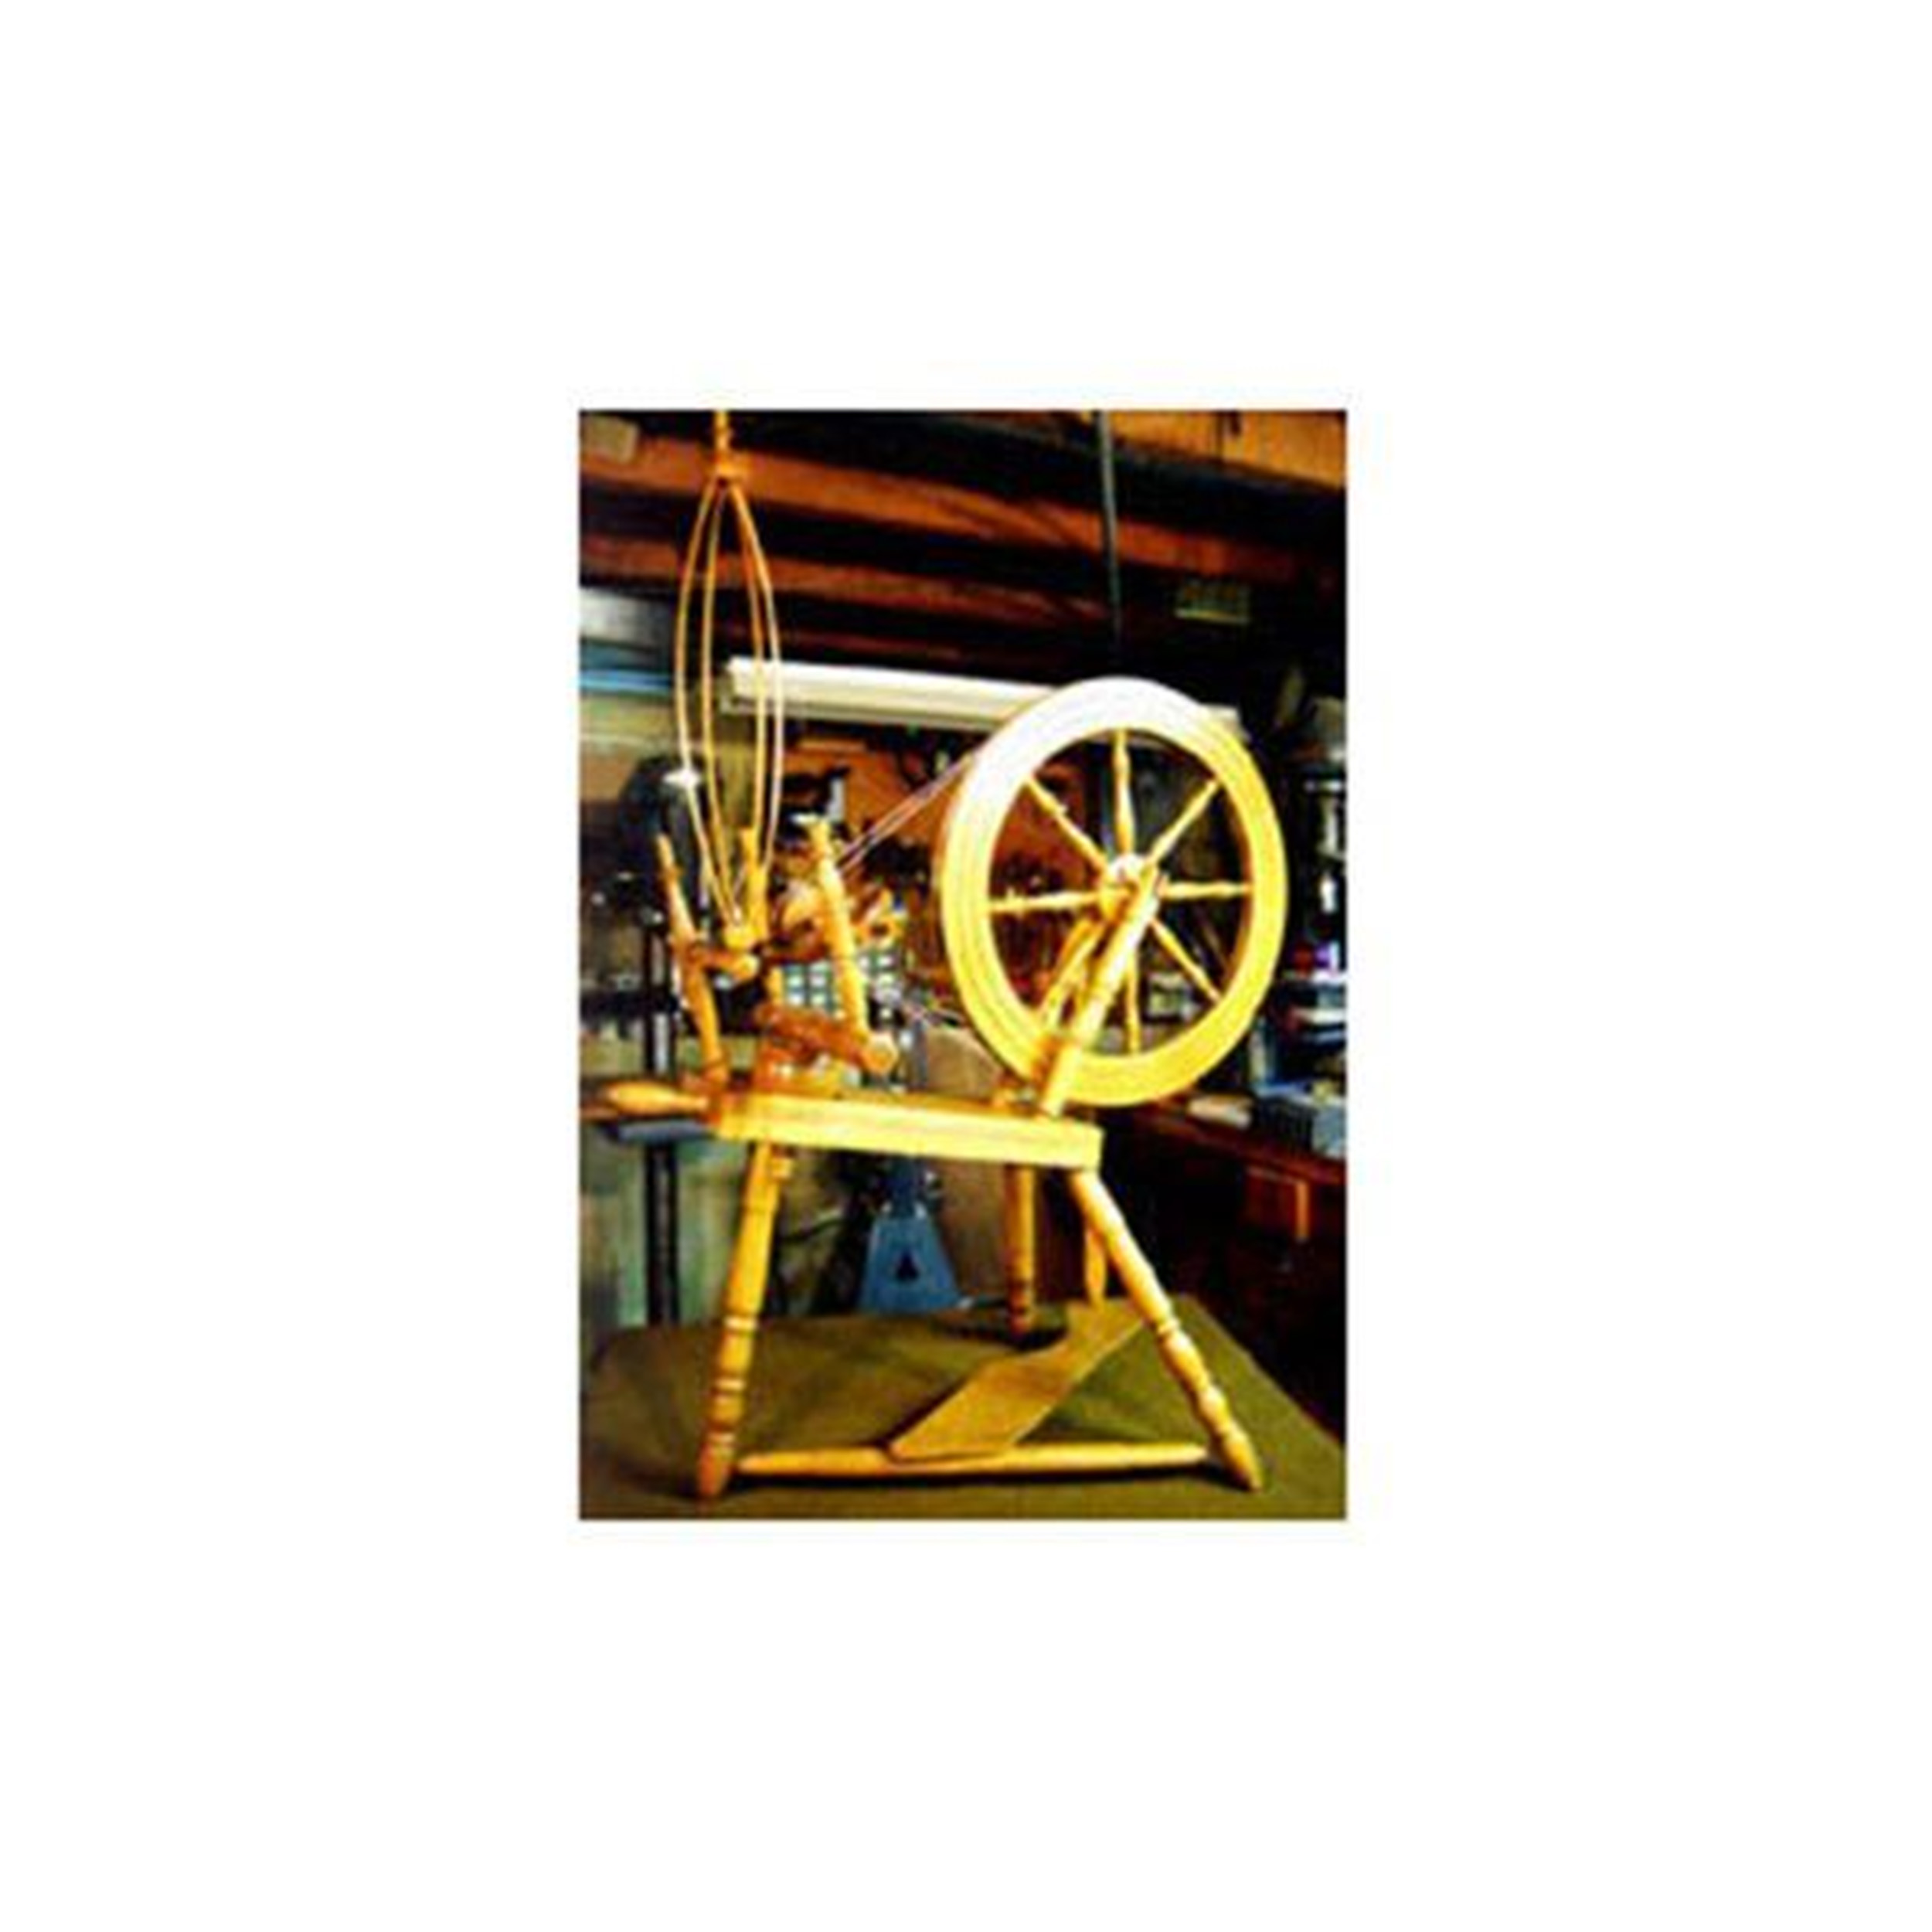 Woodworking Project Paper Plan To Build Small Spinning Wheel